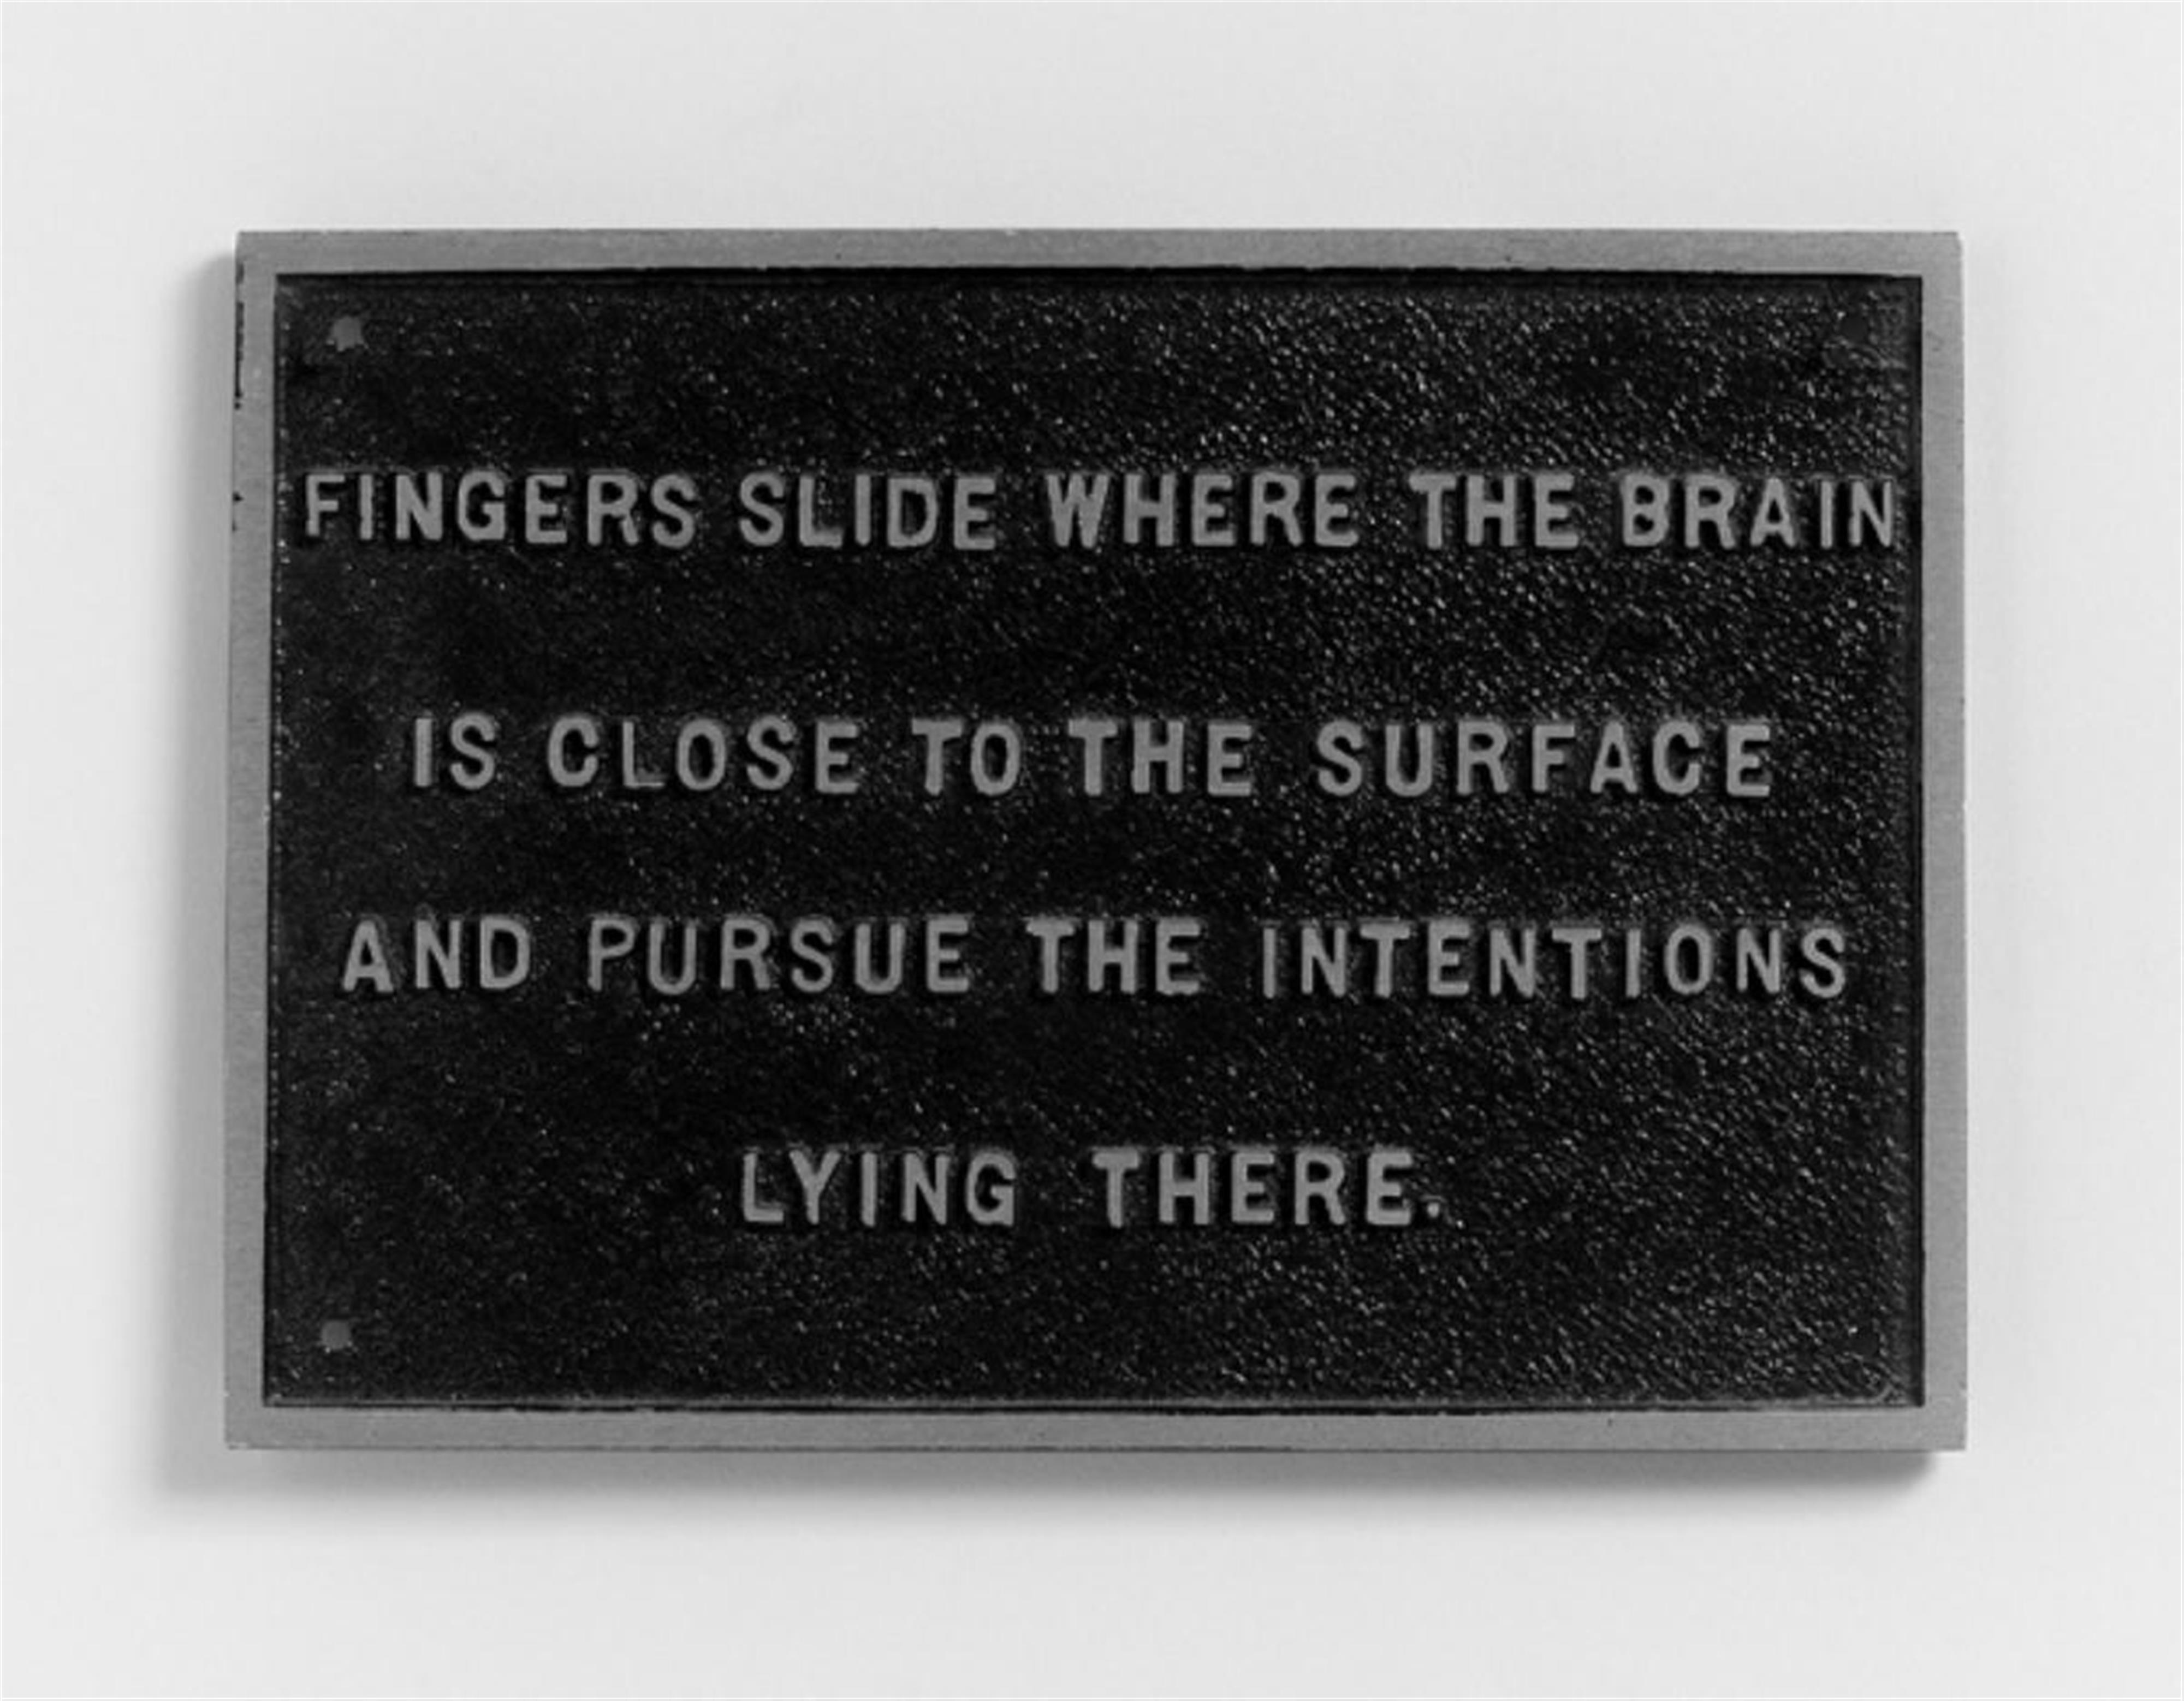 Jenny Holzer - From the Survival Series: Fingers slide where the brain is close to the surface and pursue the intentions lying there - image-1